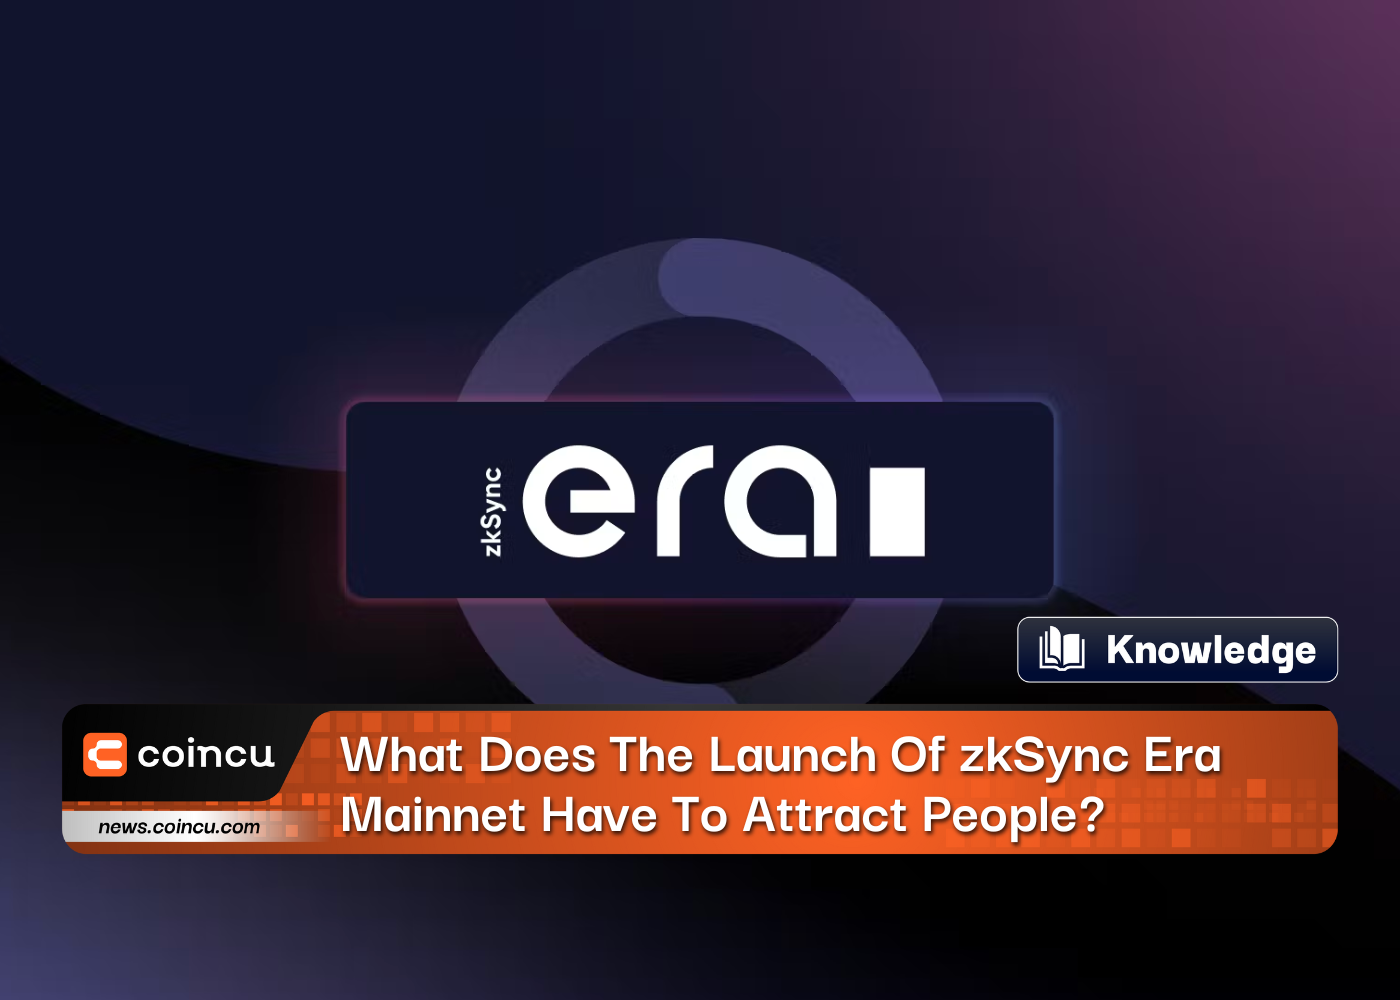 What Does The Launch Of zkSync Era Mainnet Have To Attract People?